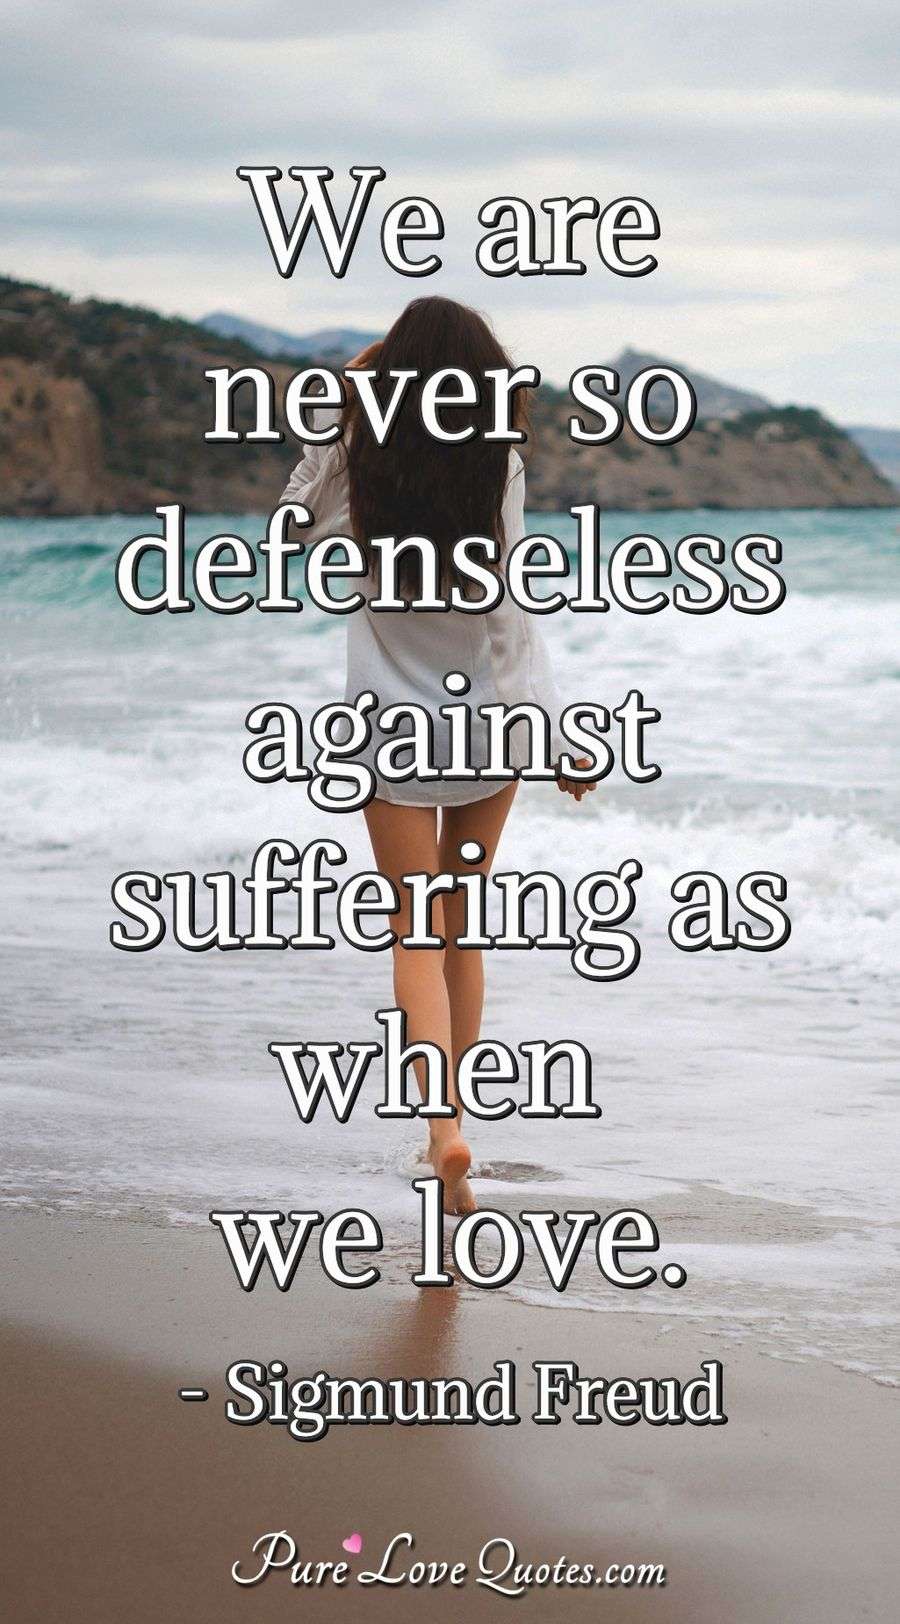 We are never so defenseless against suffering as when we love. - Sigmund Freud